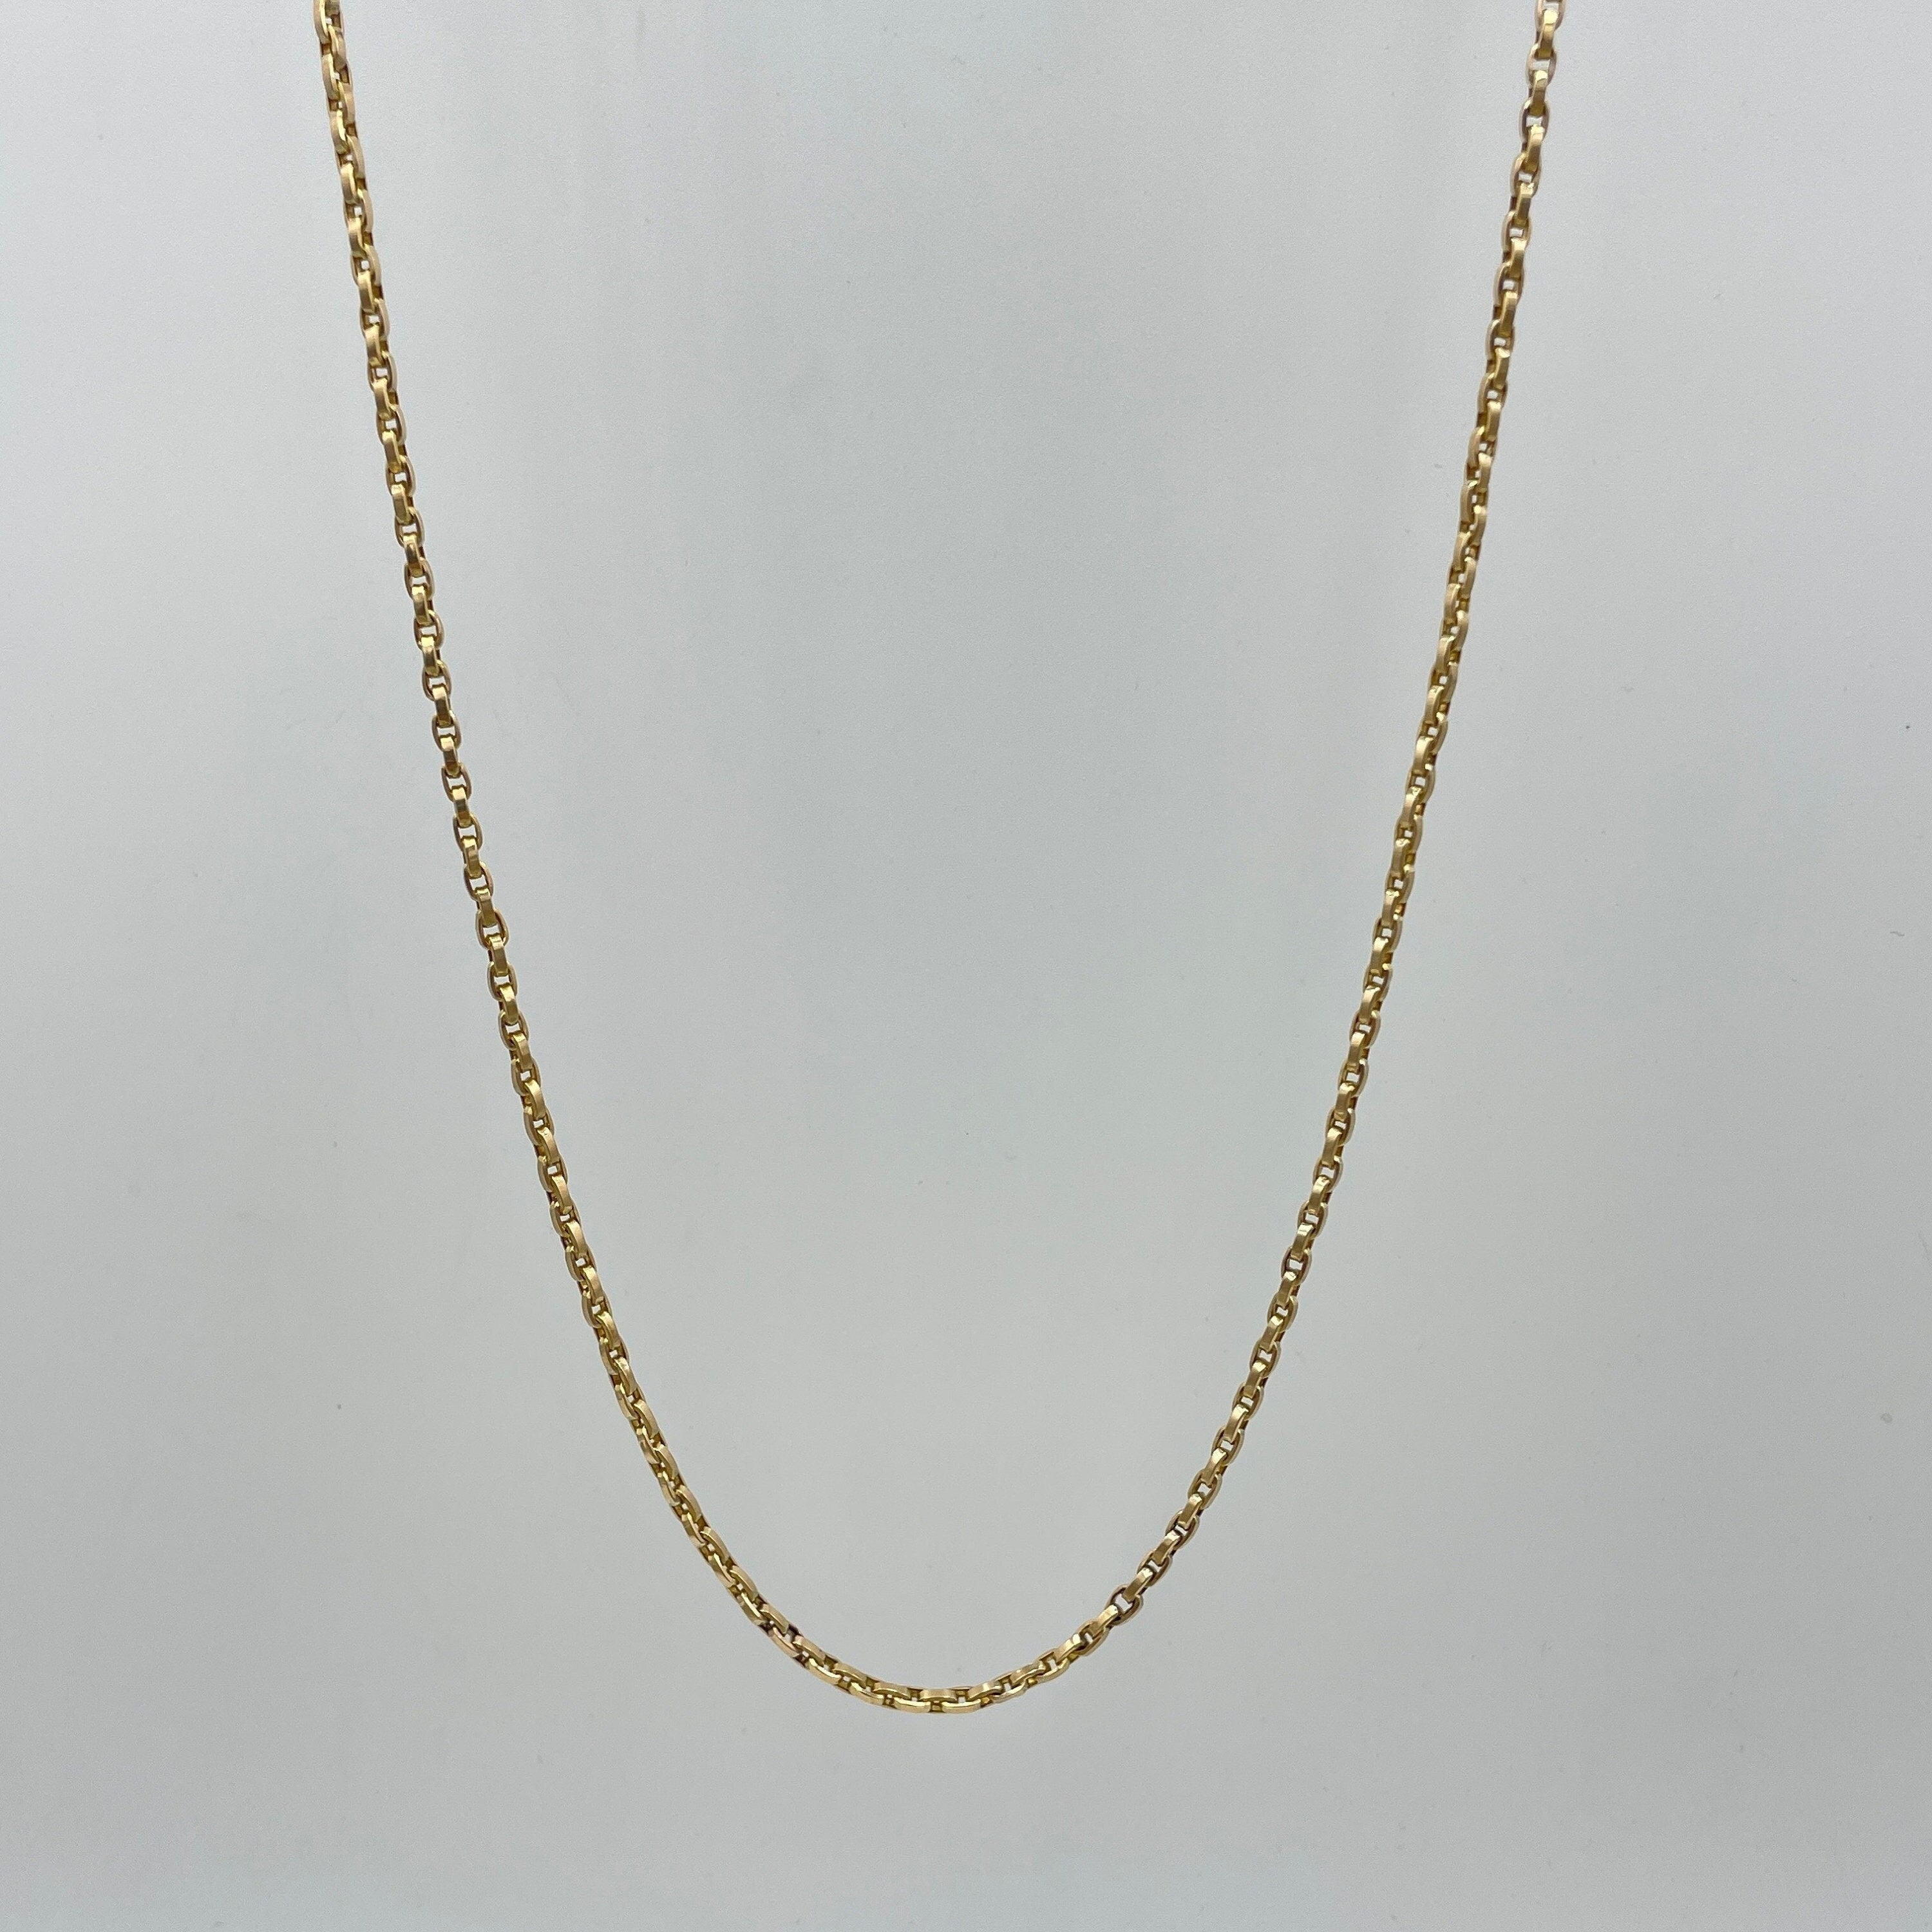 RESERVED FOR TARA Antique 9ct Gold belcher link chain necklace